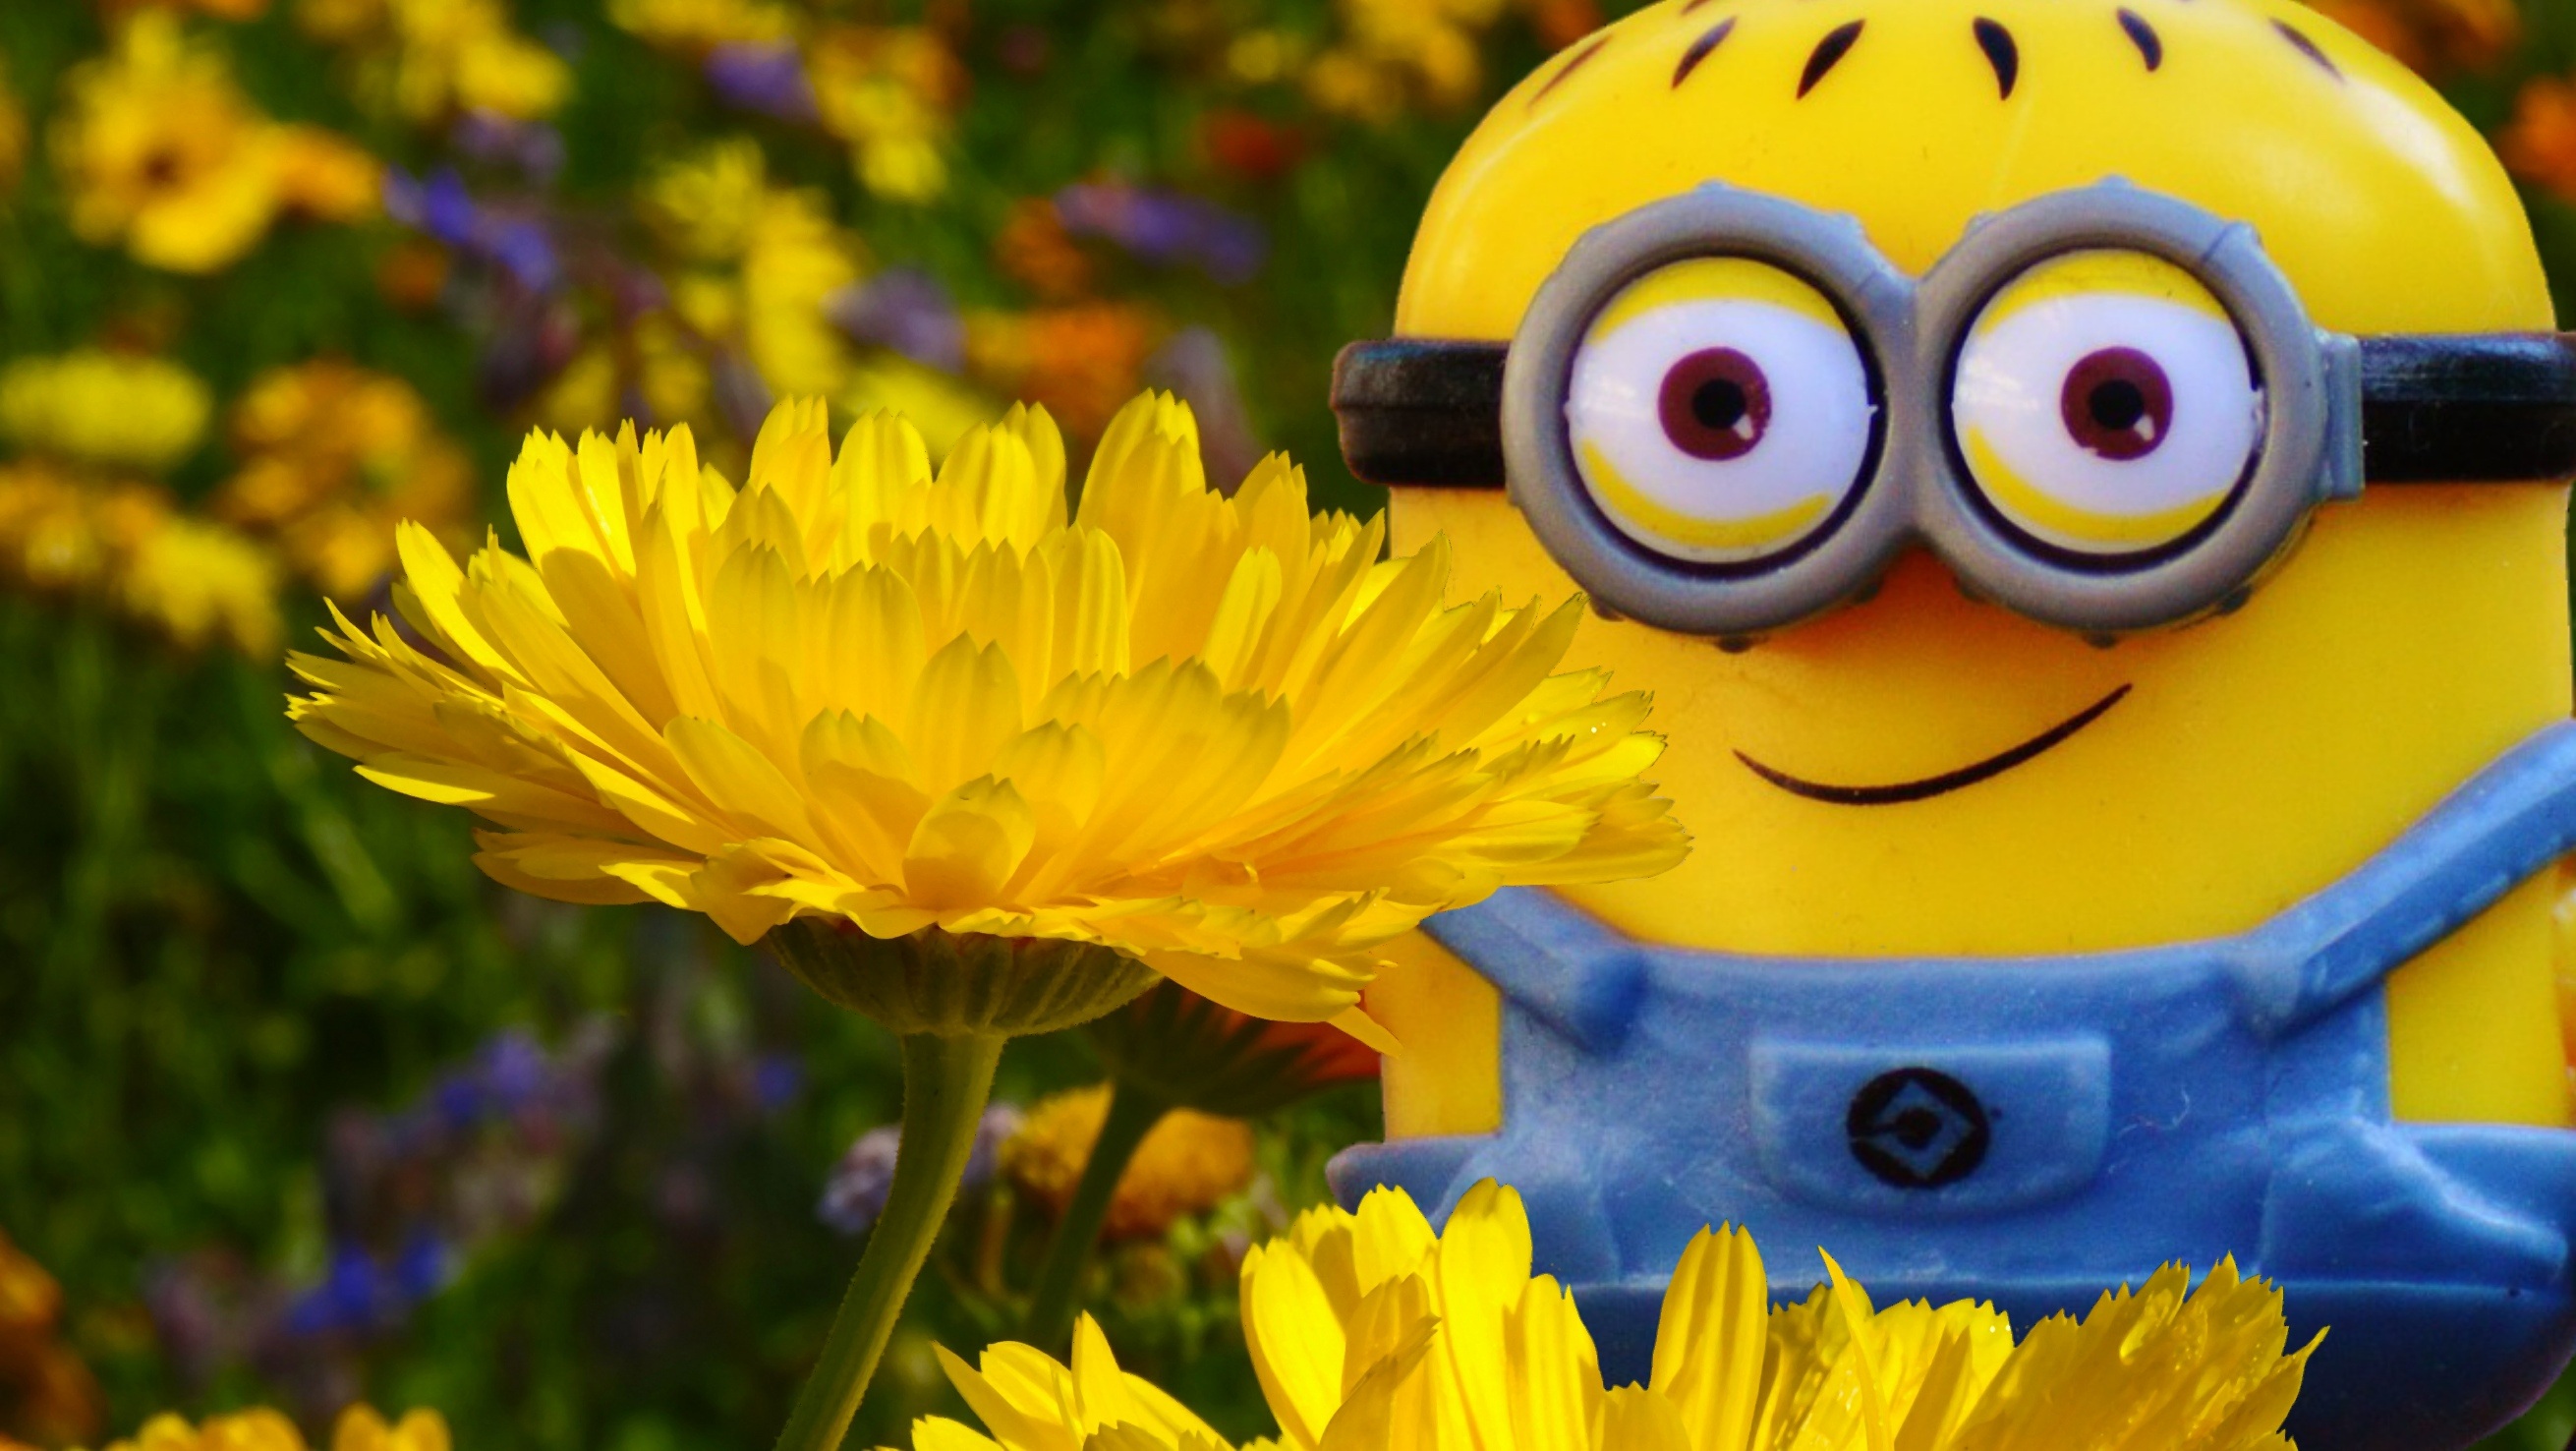 Free Image, grass, meadow, dandelion, flower, petal, spring, yellow, flora, sunflower, wildflower, flowers, close up, fun, figure, funny, minion, macro photography, flowering plant, daisy family, computer wallpaper, toy play 2621x1476